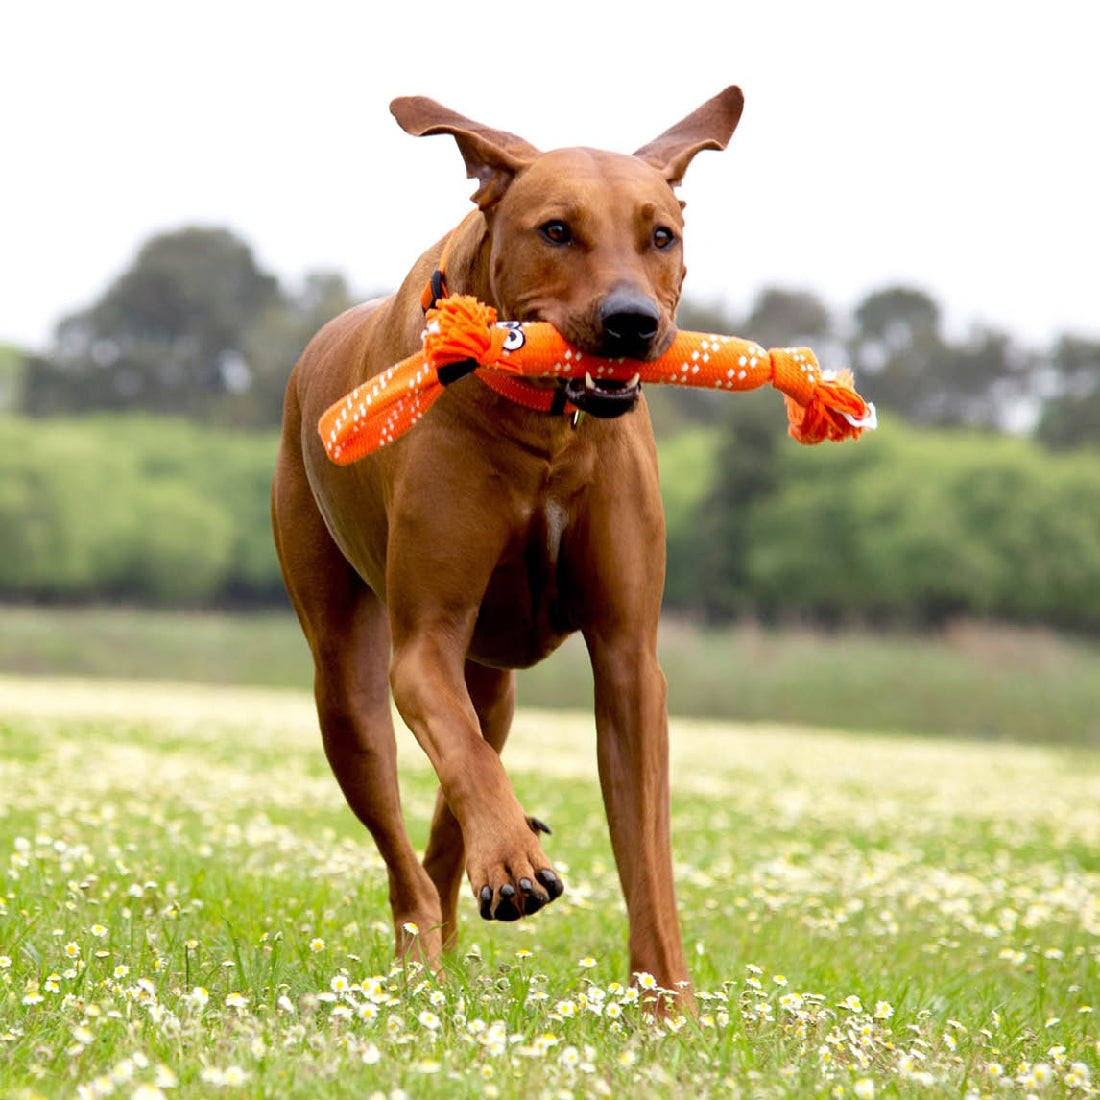 Dog with a Rogz toy in a flower field.